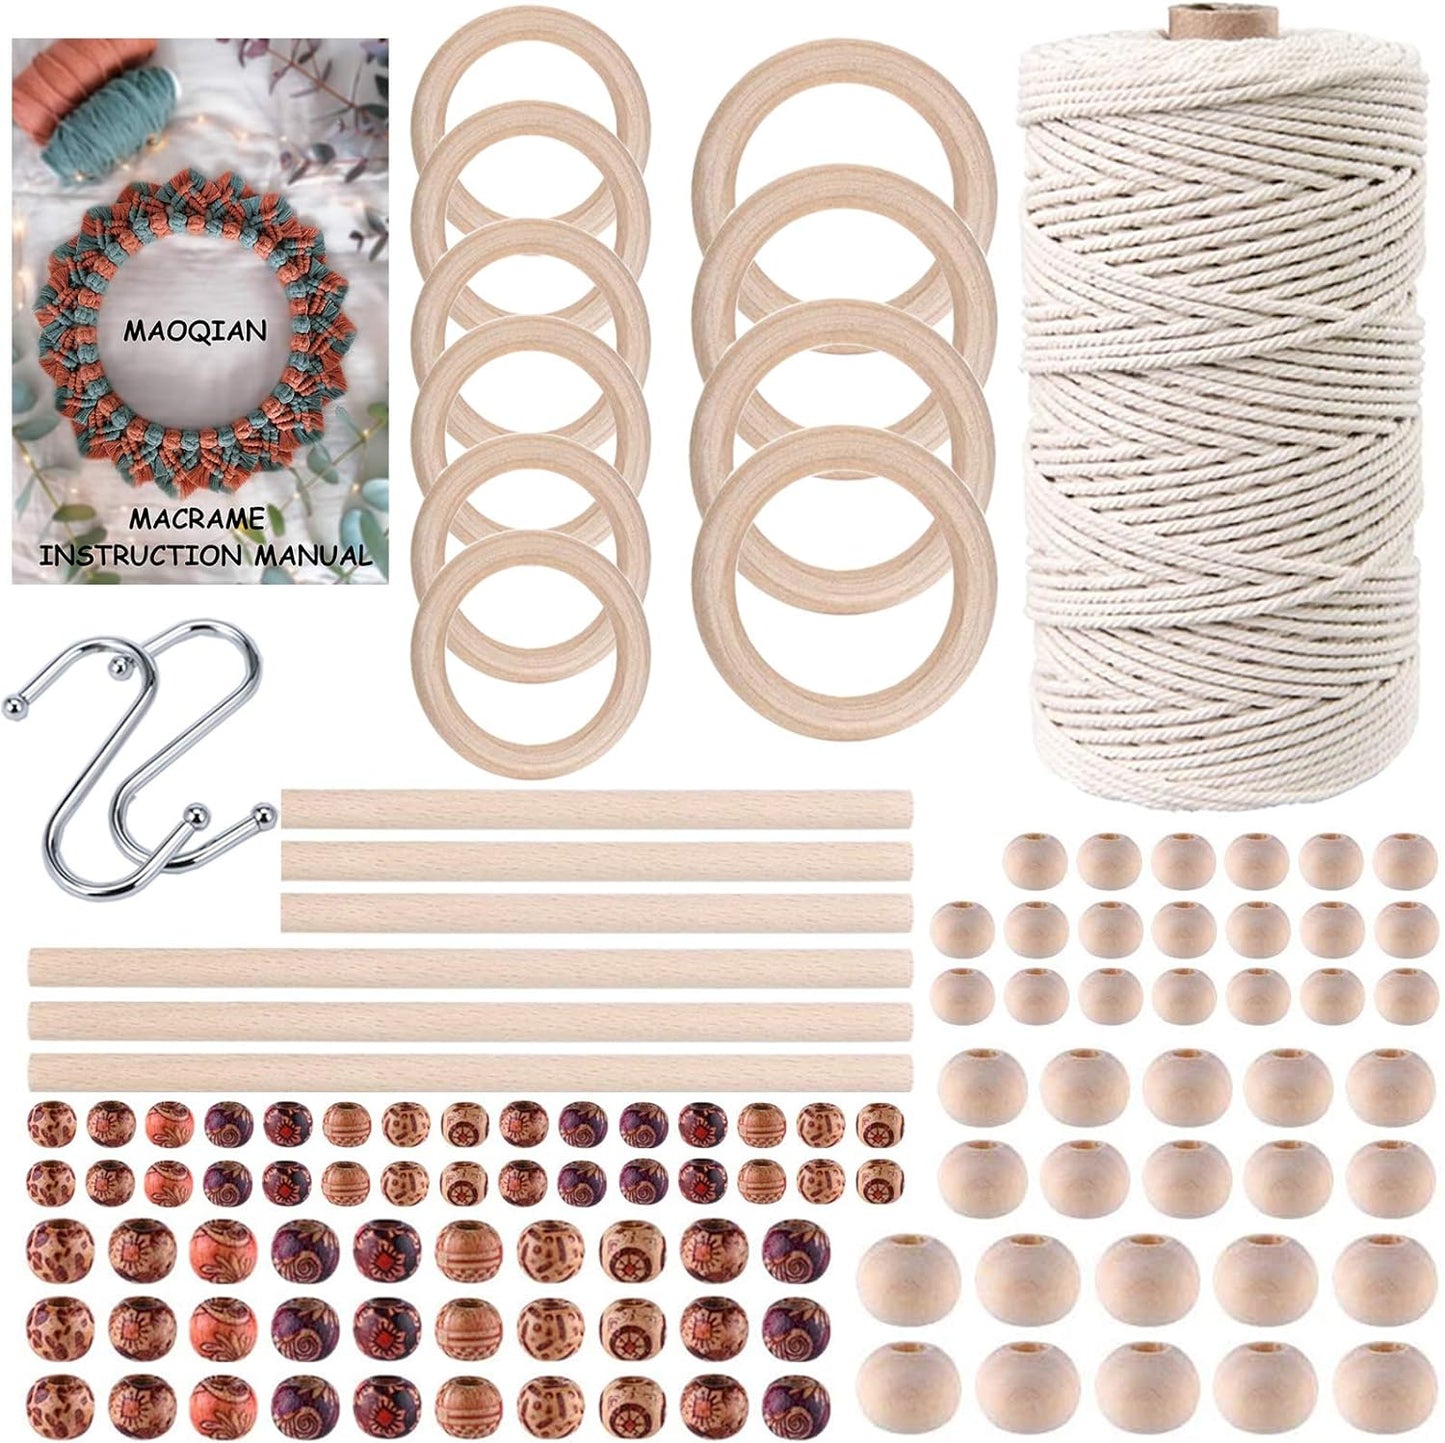 120Pcs Macrame Kits for Beginners 3Mm X 109Yards Natural Cotton Macrame Cord with Wooden Beads & Rings,Wooden Sticks,Metal Rings Macrame Supplies Best for Macrame Plant Hanger